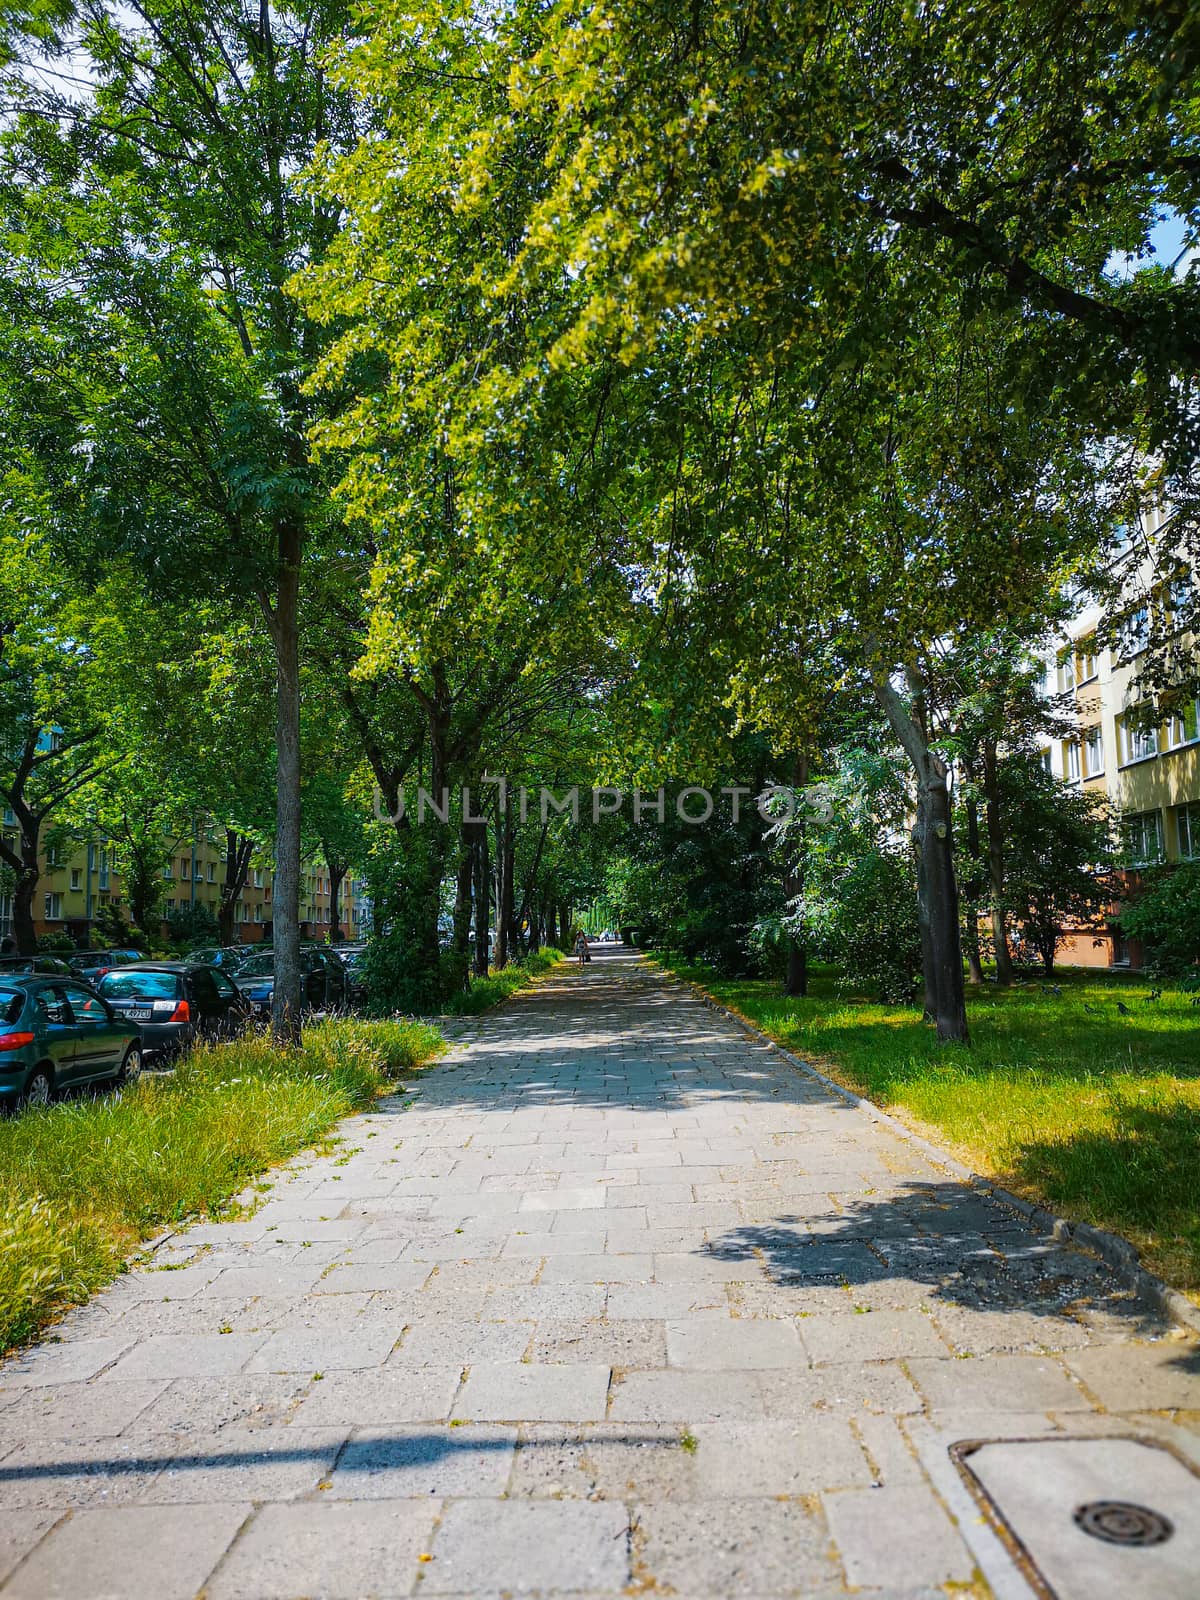 Pavement next to street with green trees above at summer sunny day